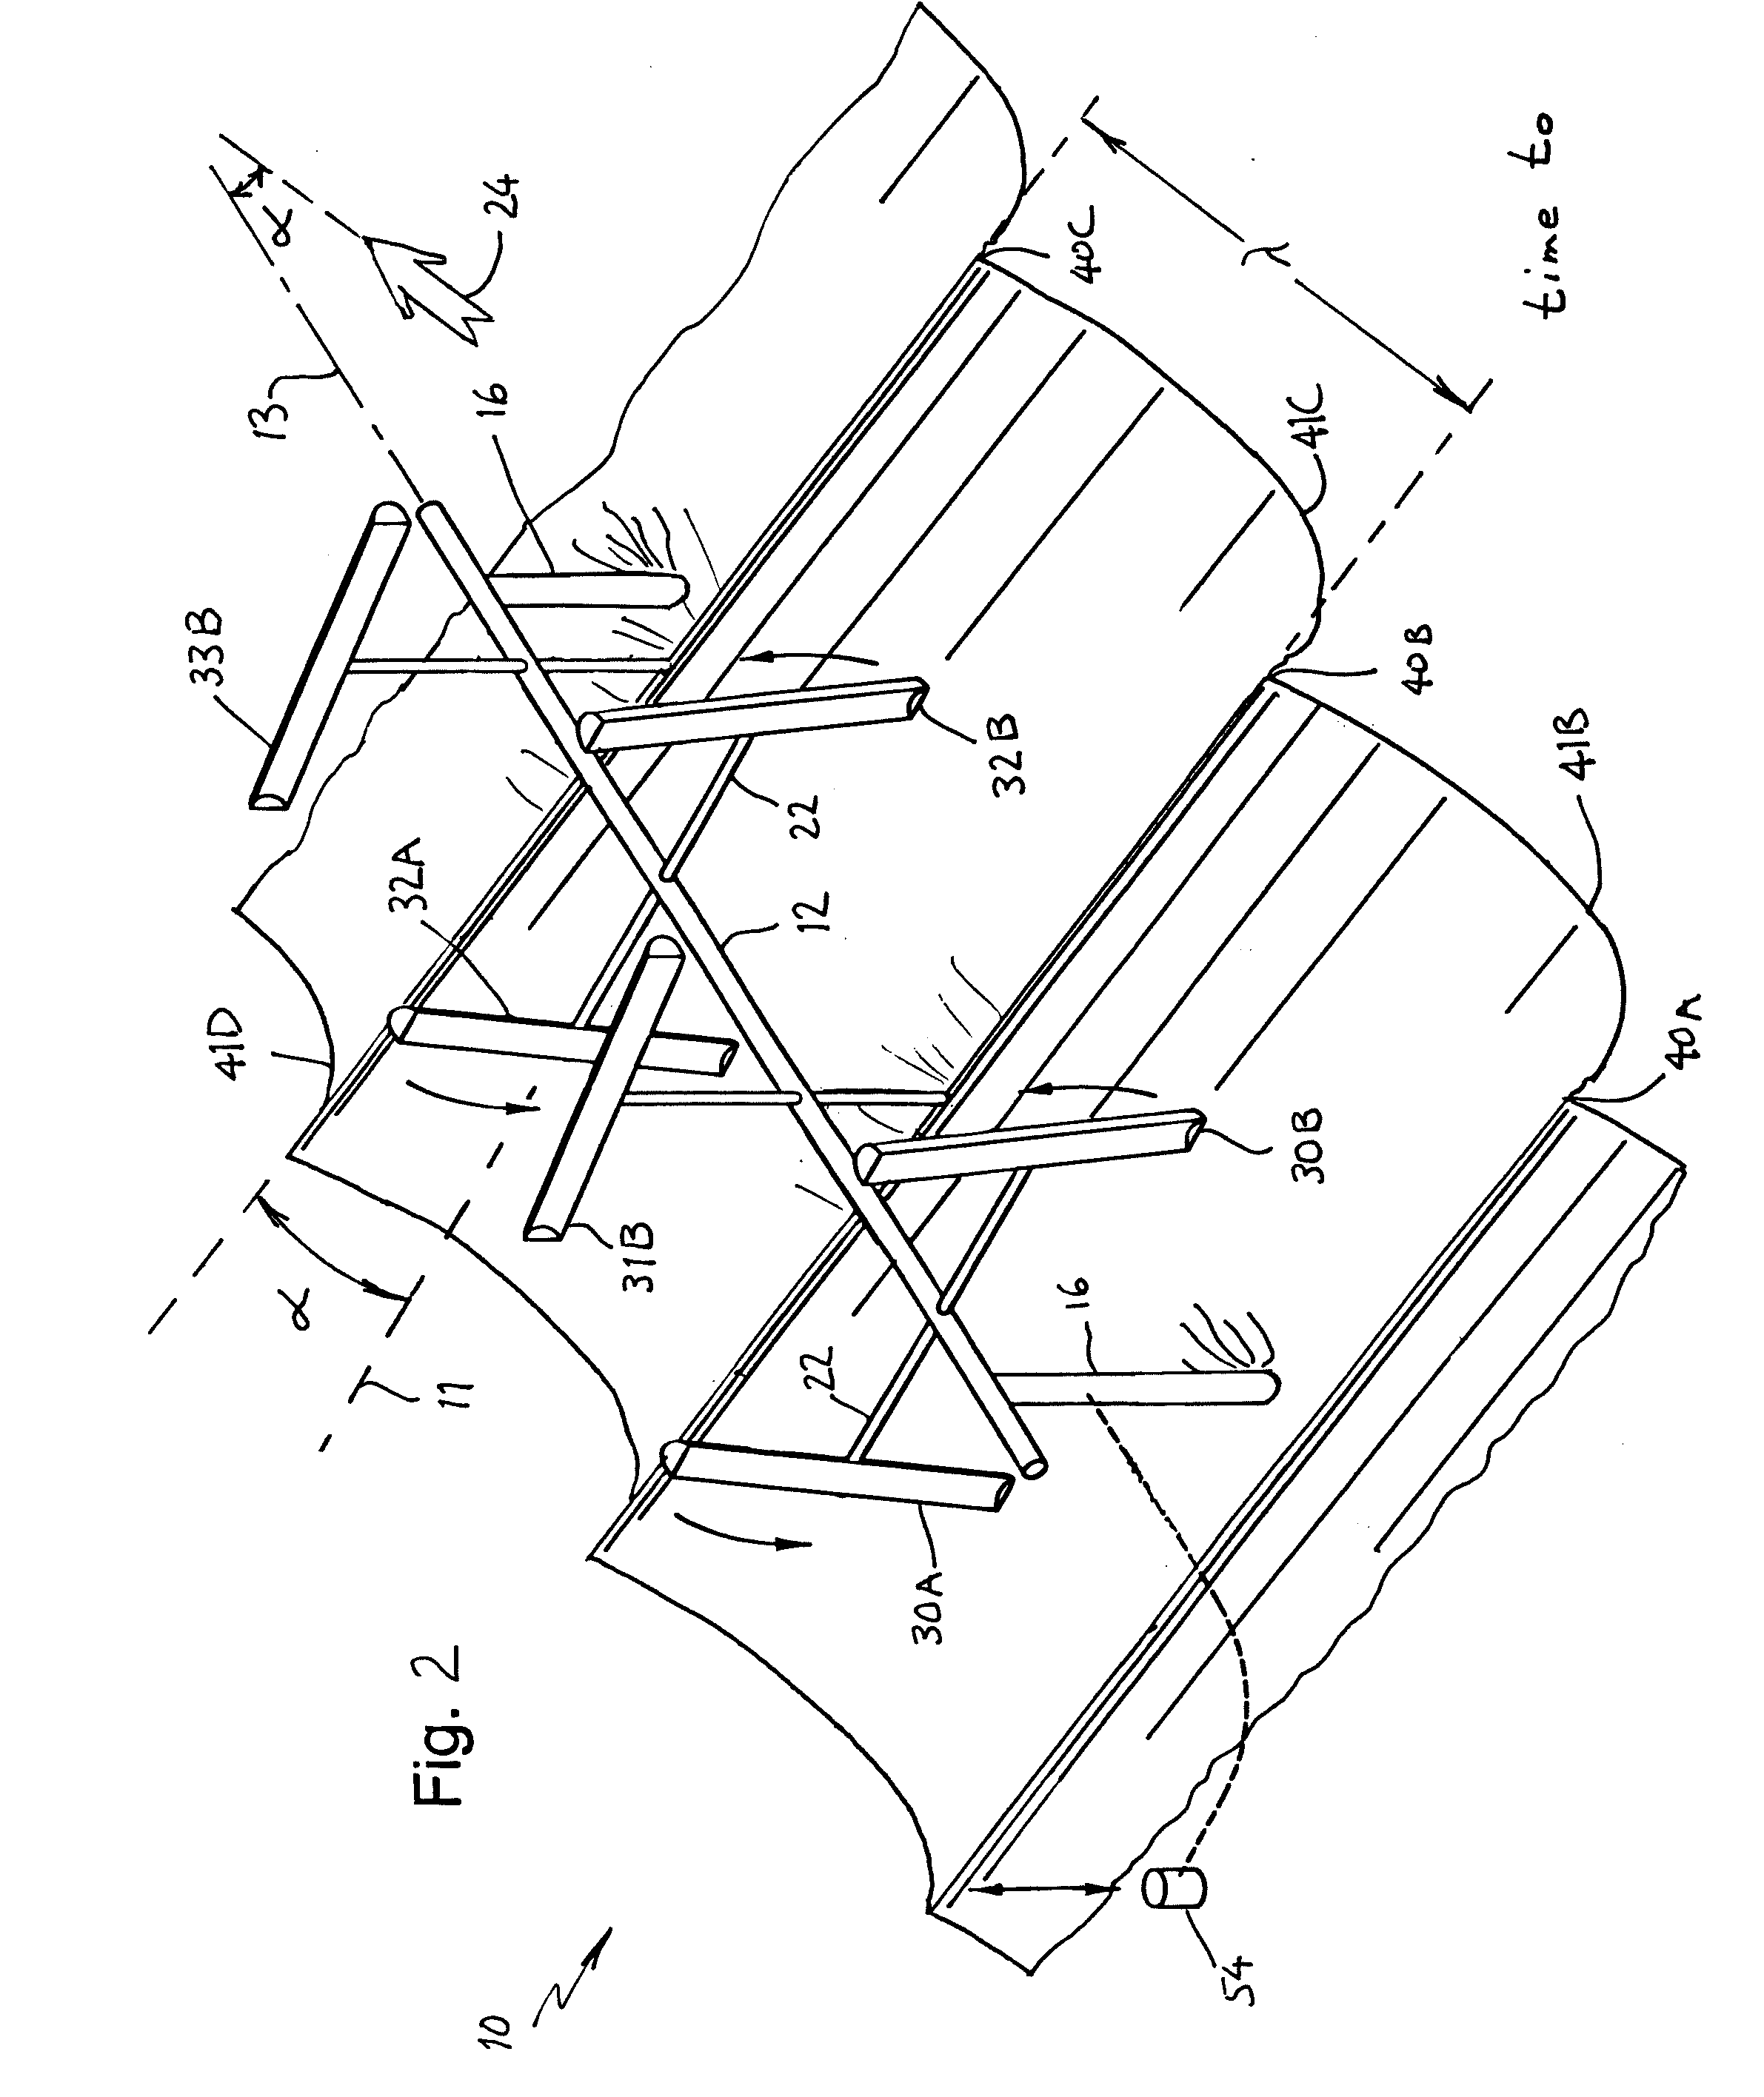 Turbine System and Method for Extracting Energy From Waves, Wind, and Other Fluid Flows